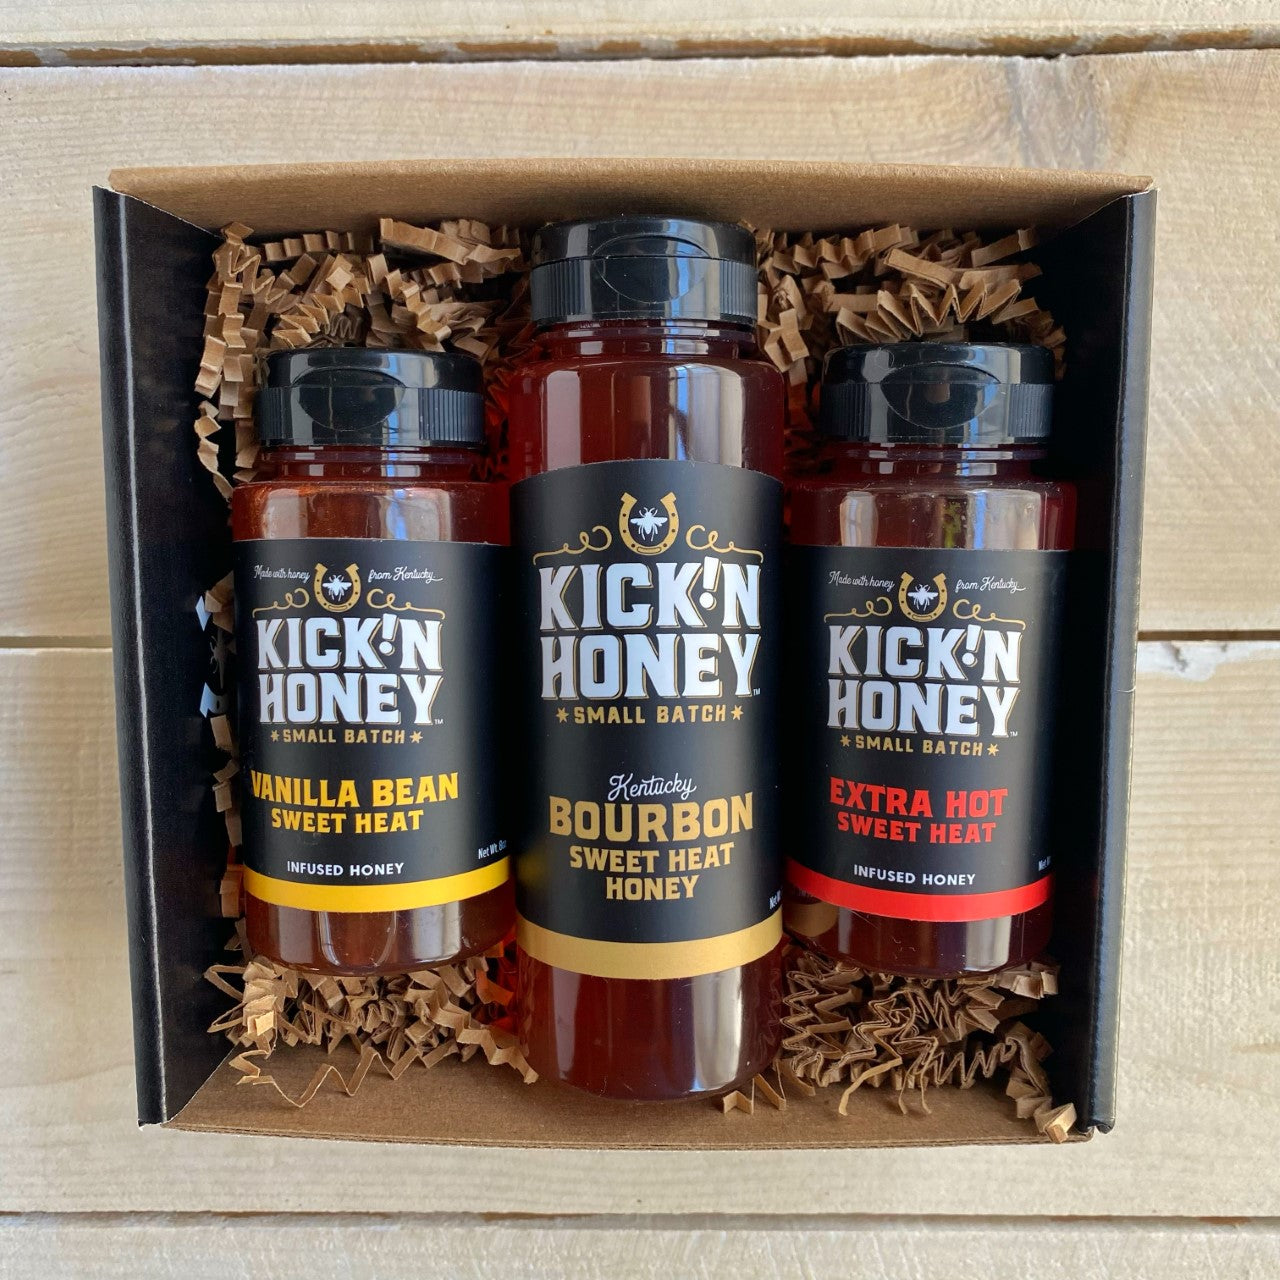 Our Kentucky Bourbon Hot Honey gift box is perfect for the bourbon lover. It features a 12oz. bottle of Kick'n Honey, Bourbon hot honey, plus an bottle of Vanilla Bean Hot Honey and Extra Hot Honey.